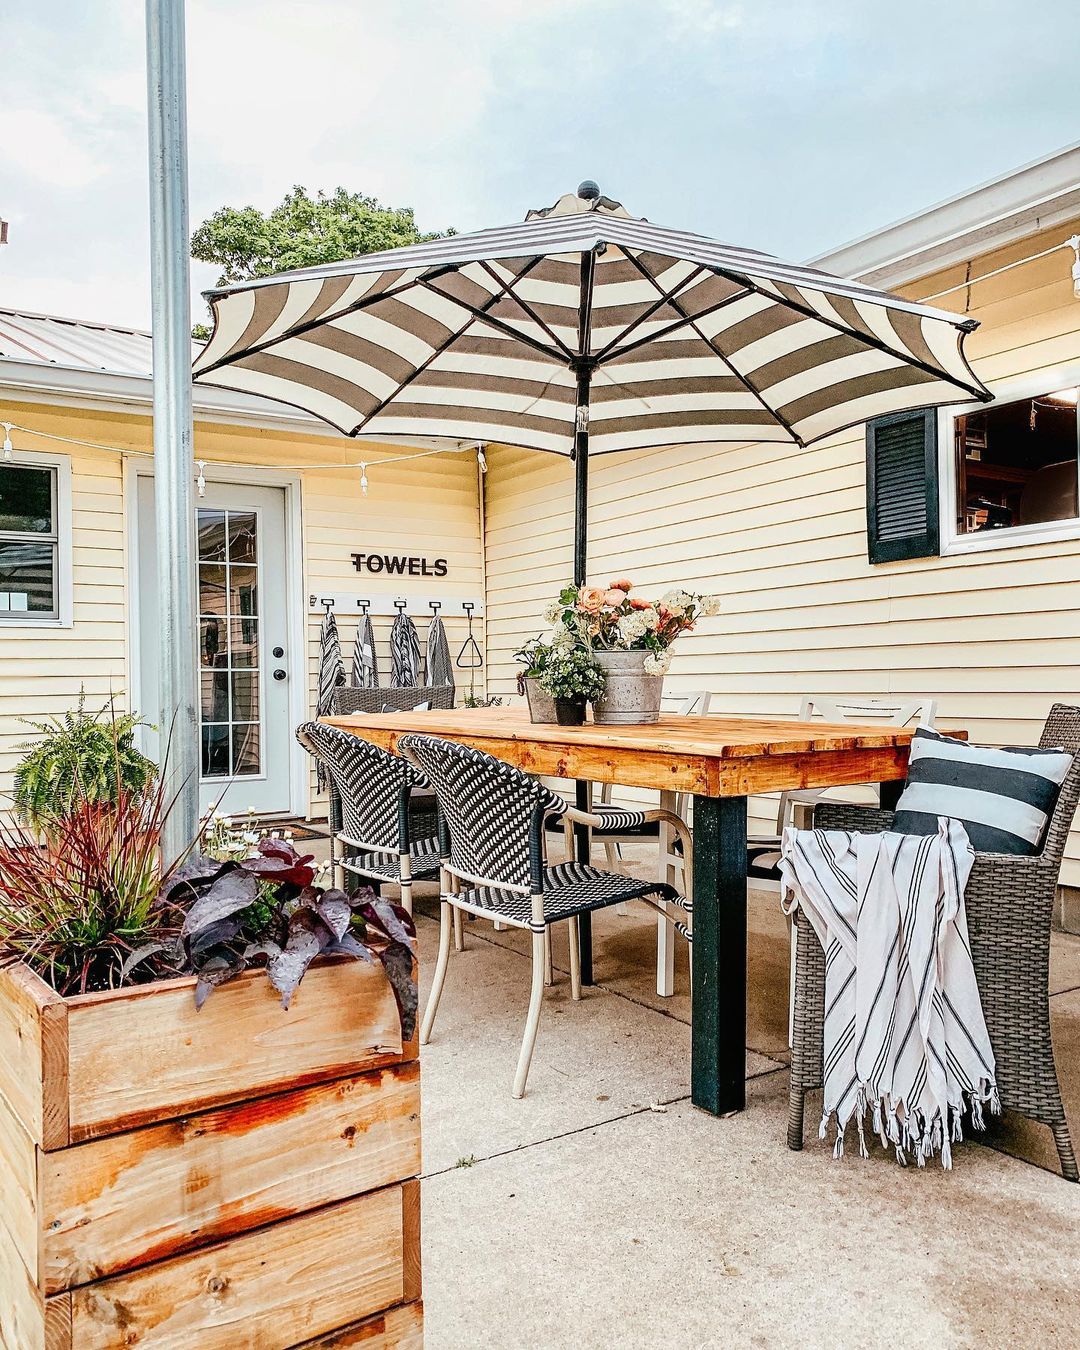 Backyard Patio Space with an Umbrella Table. Photo by Instagram user @our_forever_farmhouse